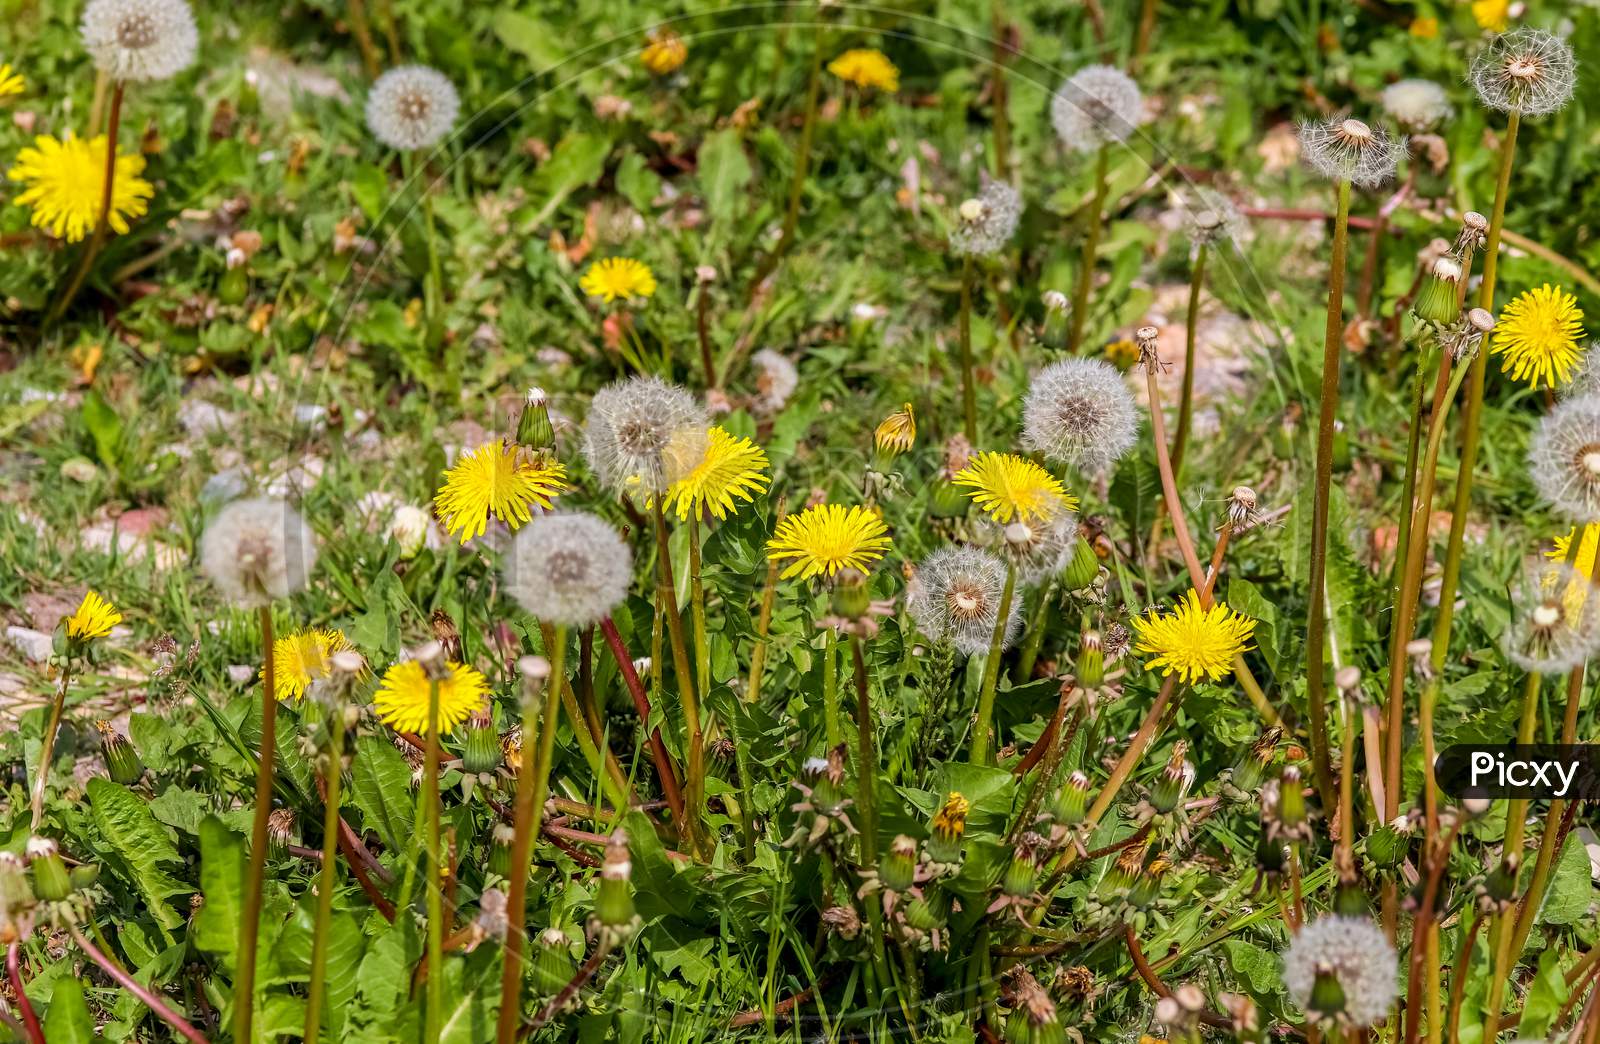 Close up view at a blowball flower found on a green meadow full of dandelions